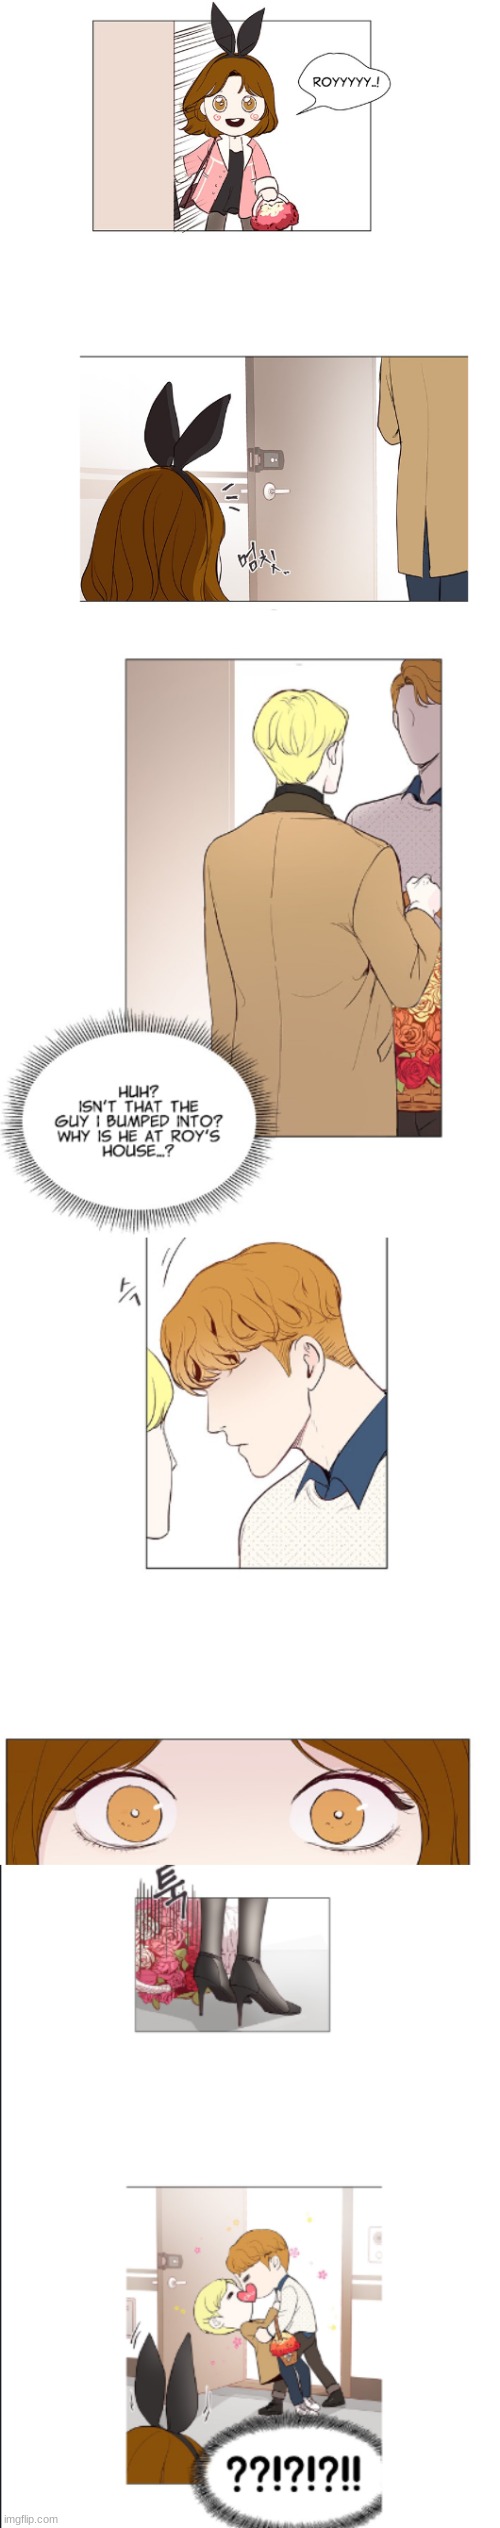 this is a rather surprising way to find out your bf is gay | image tagged in anime,manga,manhwa | made w/ Imgflip meme maker